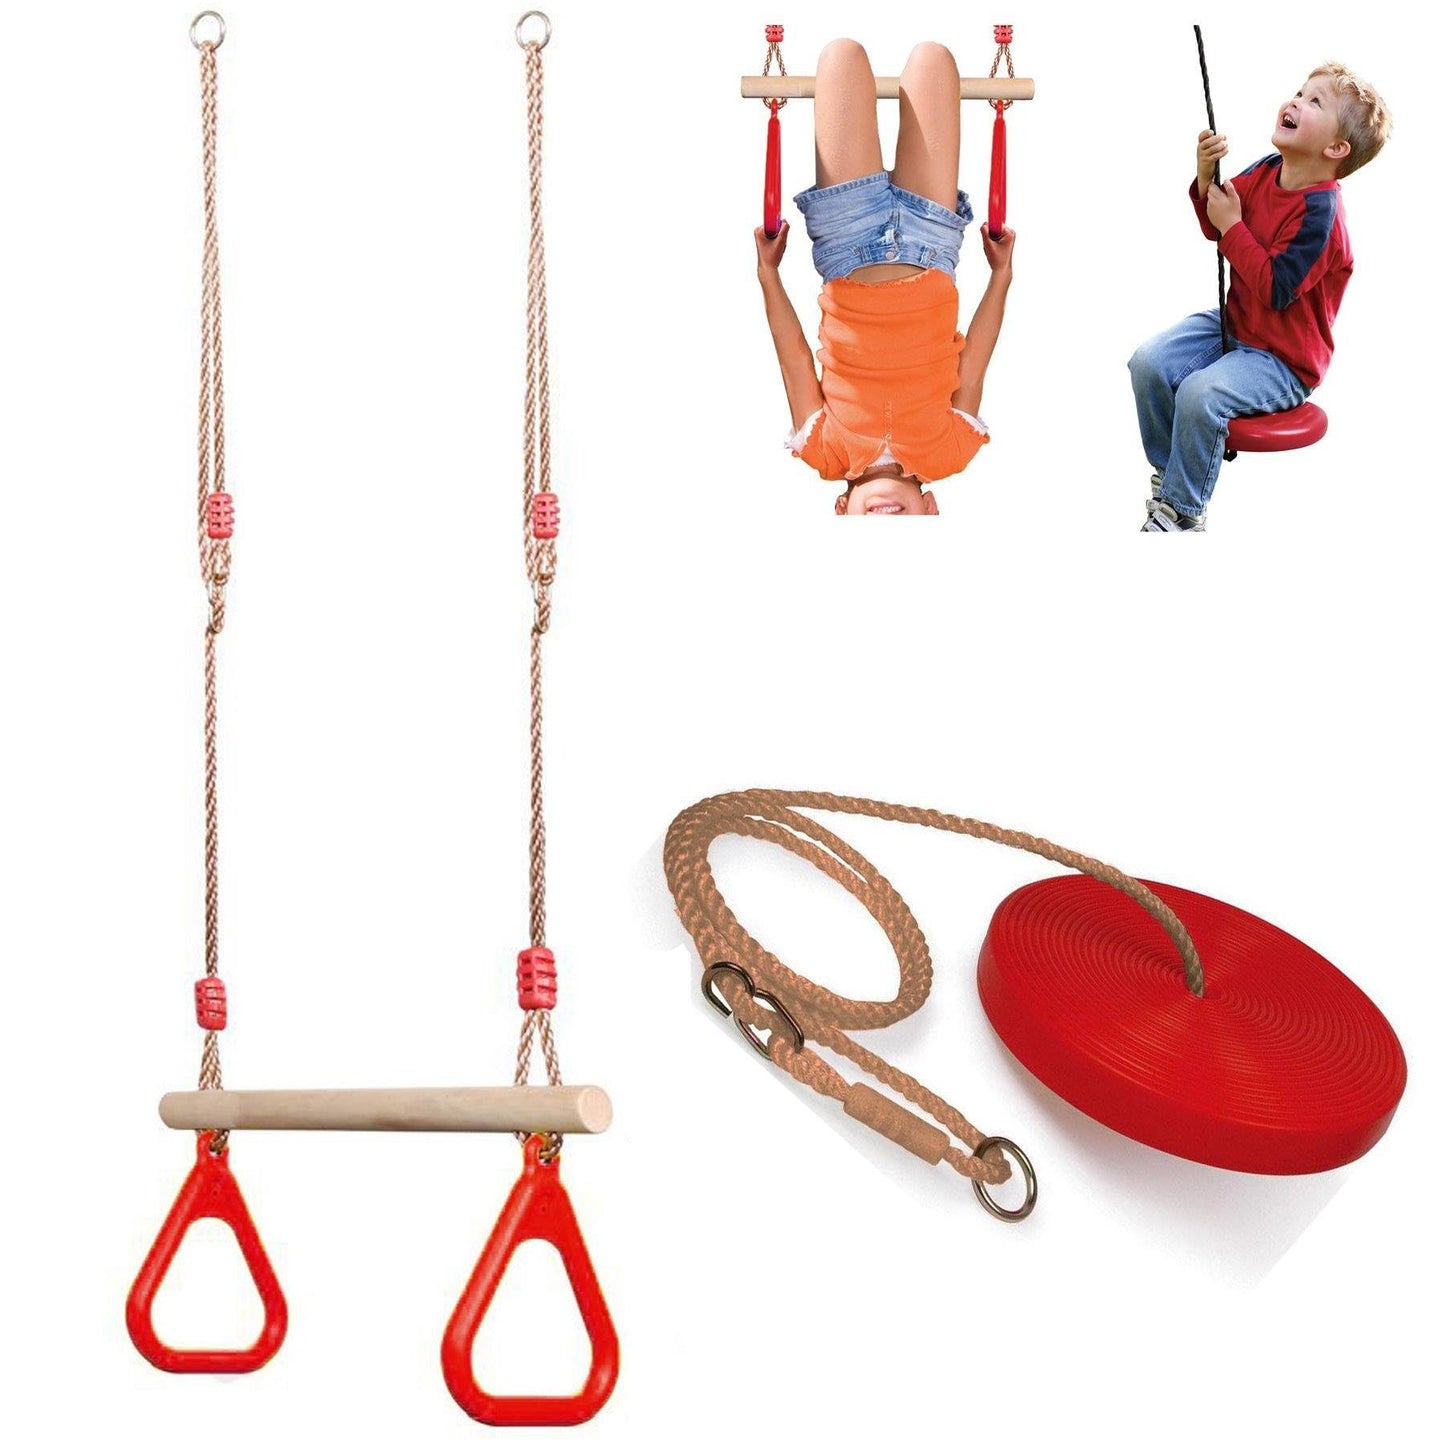 Trapeze Swing & Plate Seat by The Magic Toy Shop - UKBuyZone